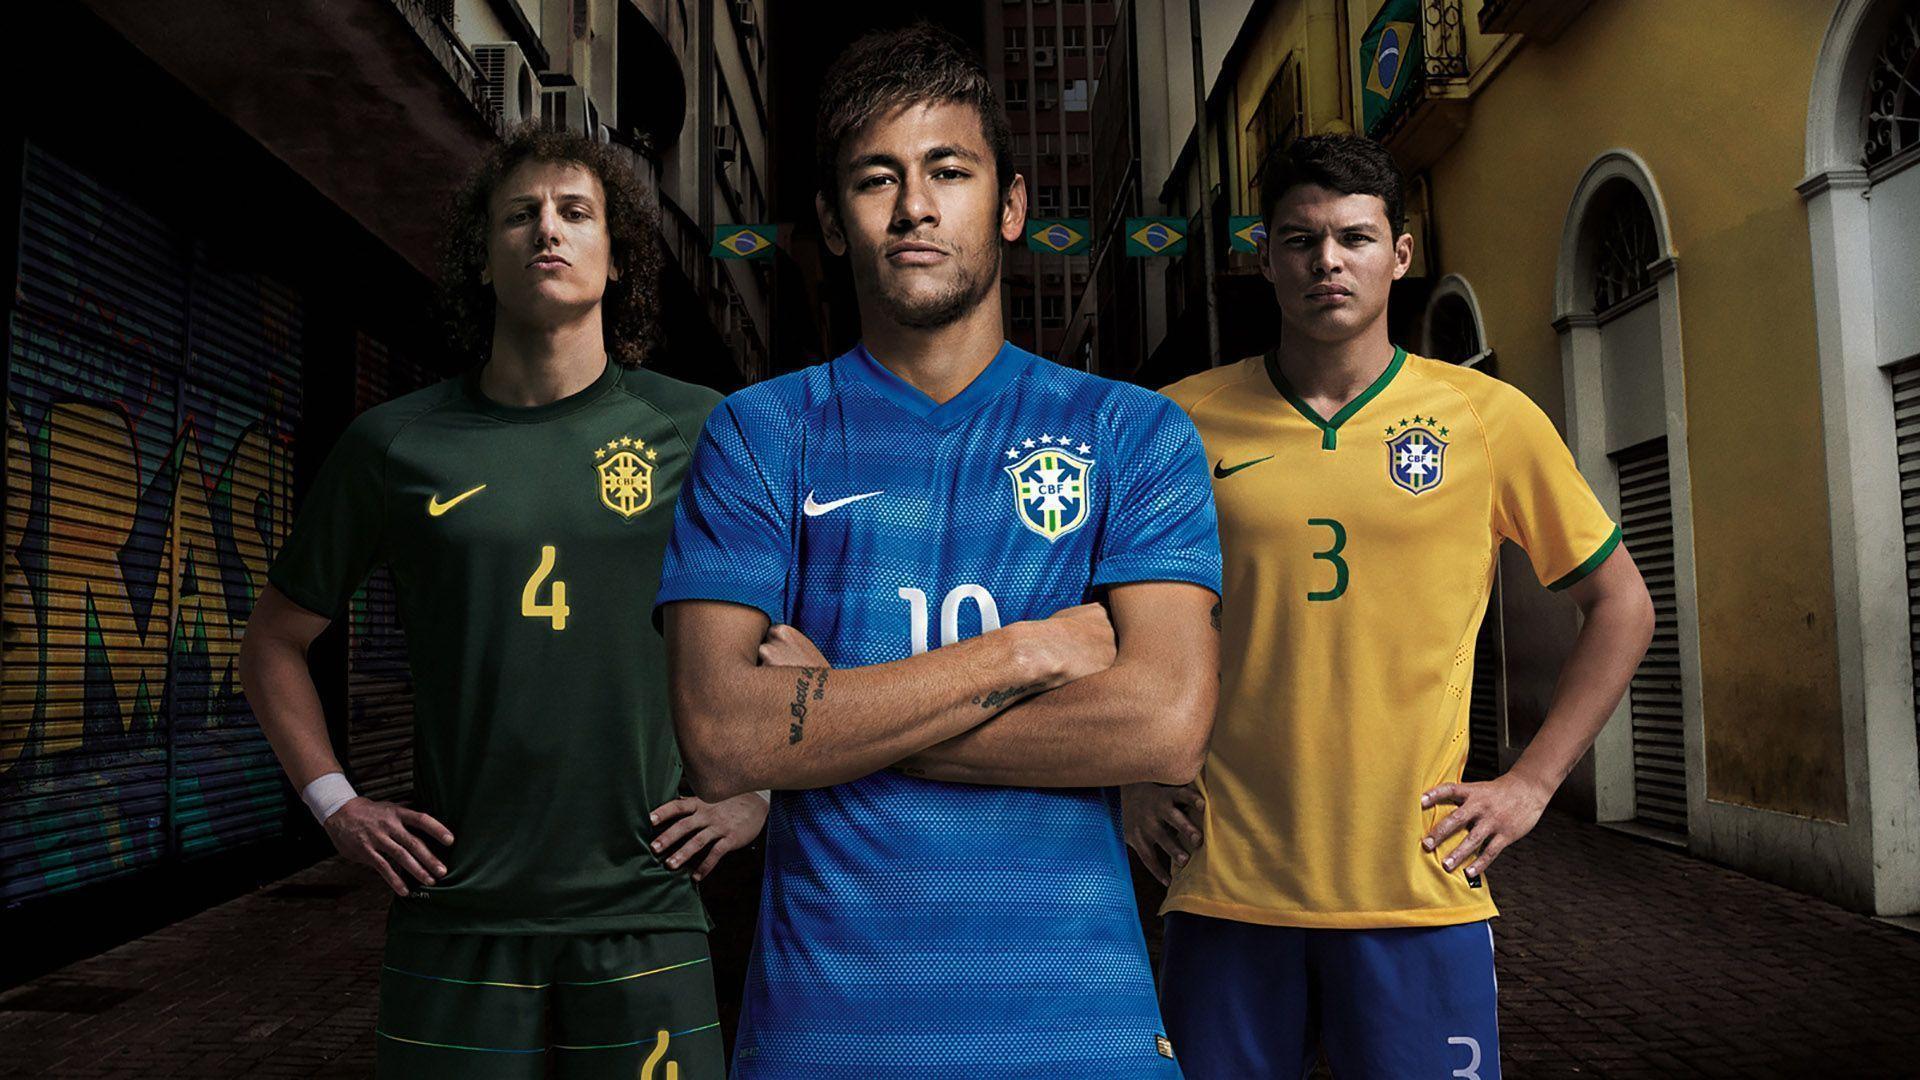 Brazil Football Team 2014 World Cup Kit Wallpapers Wide or HD